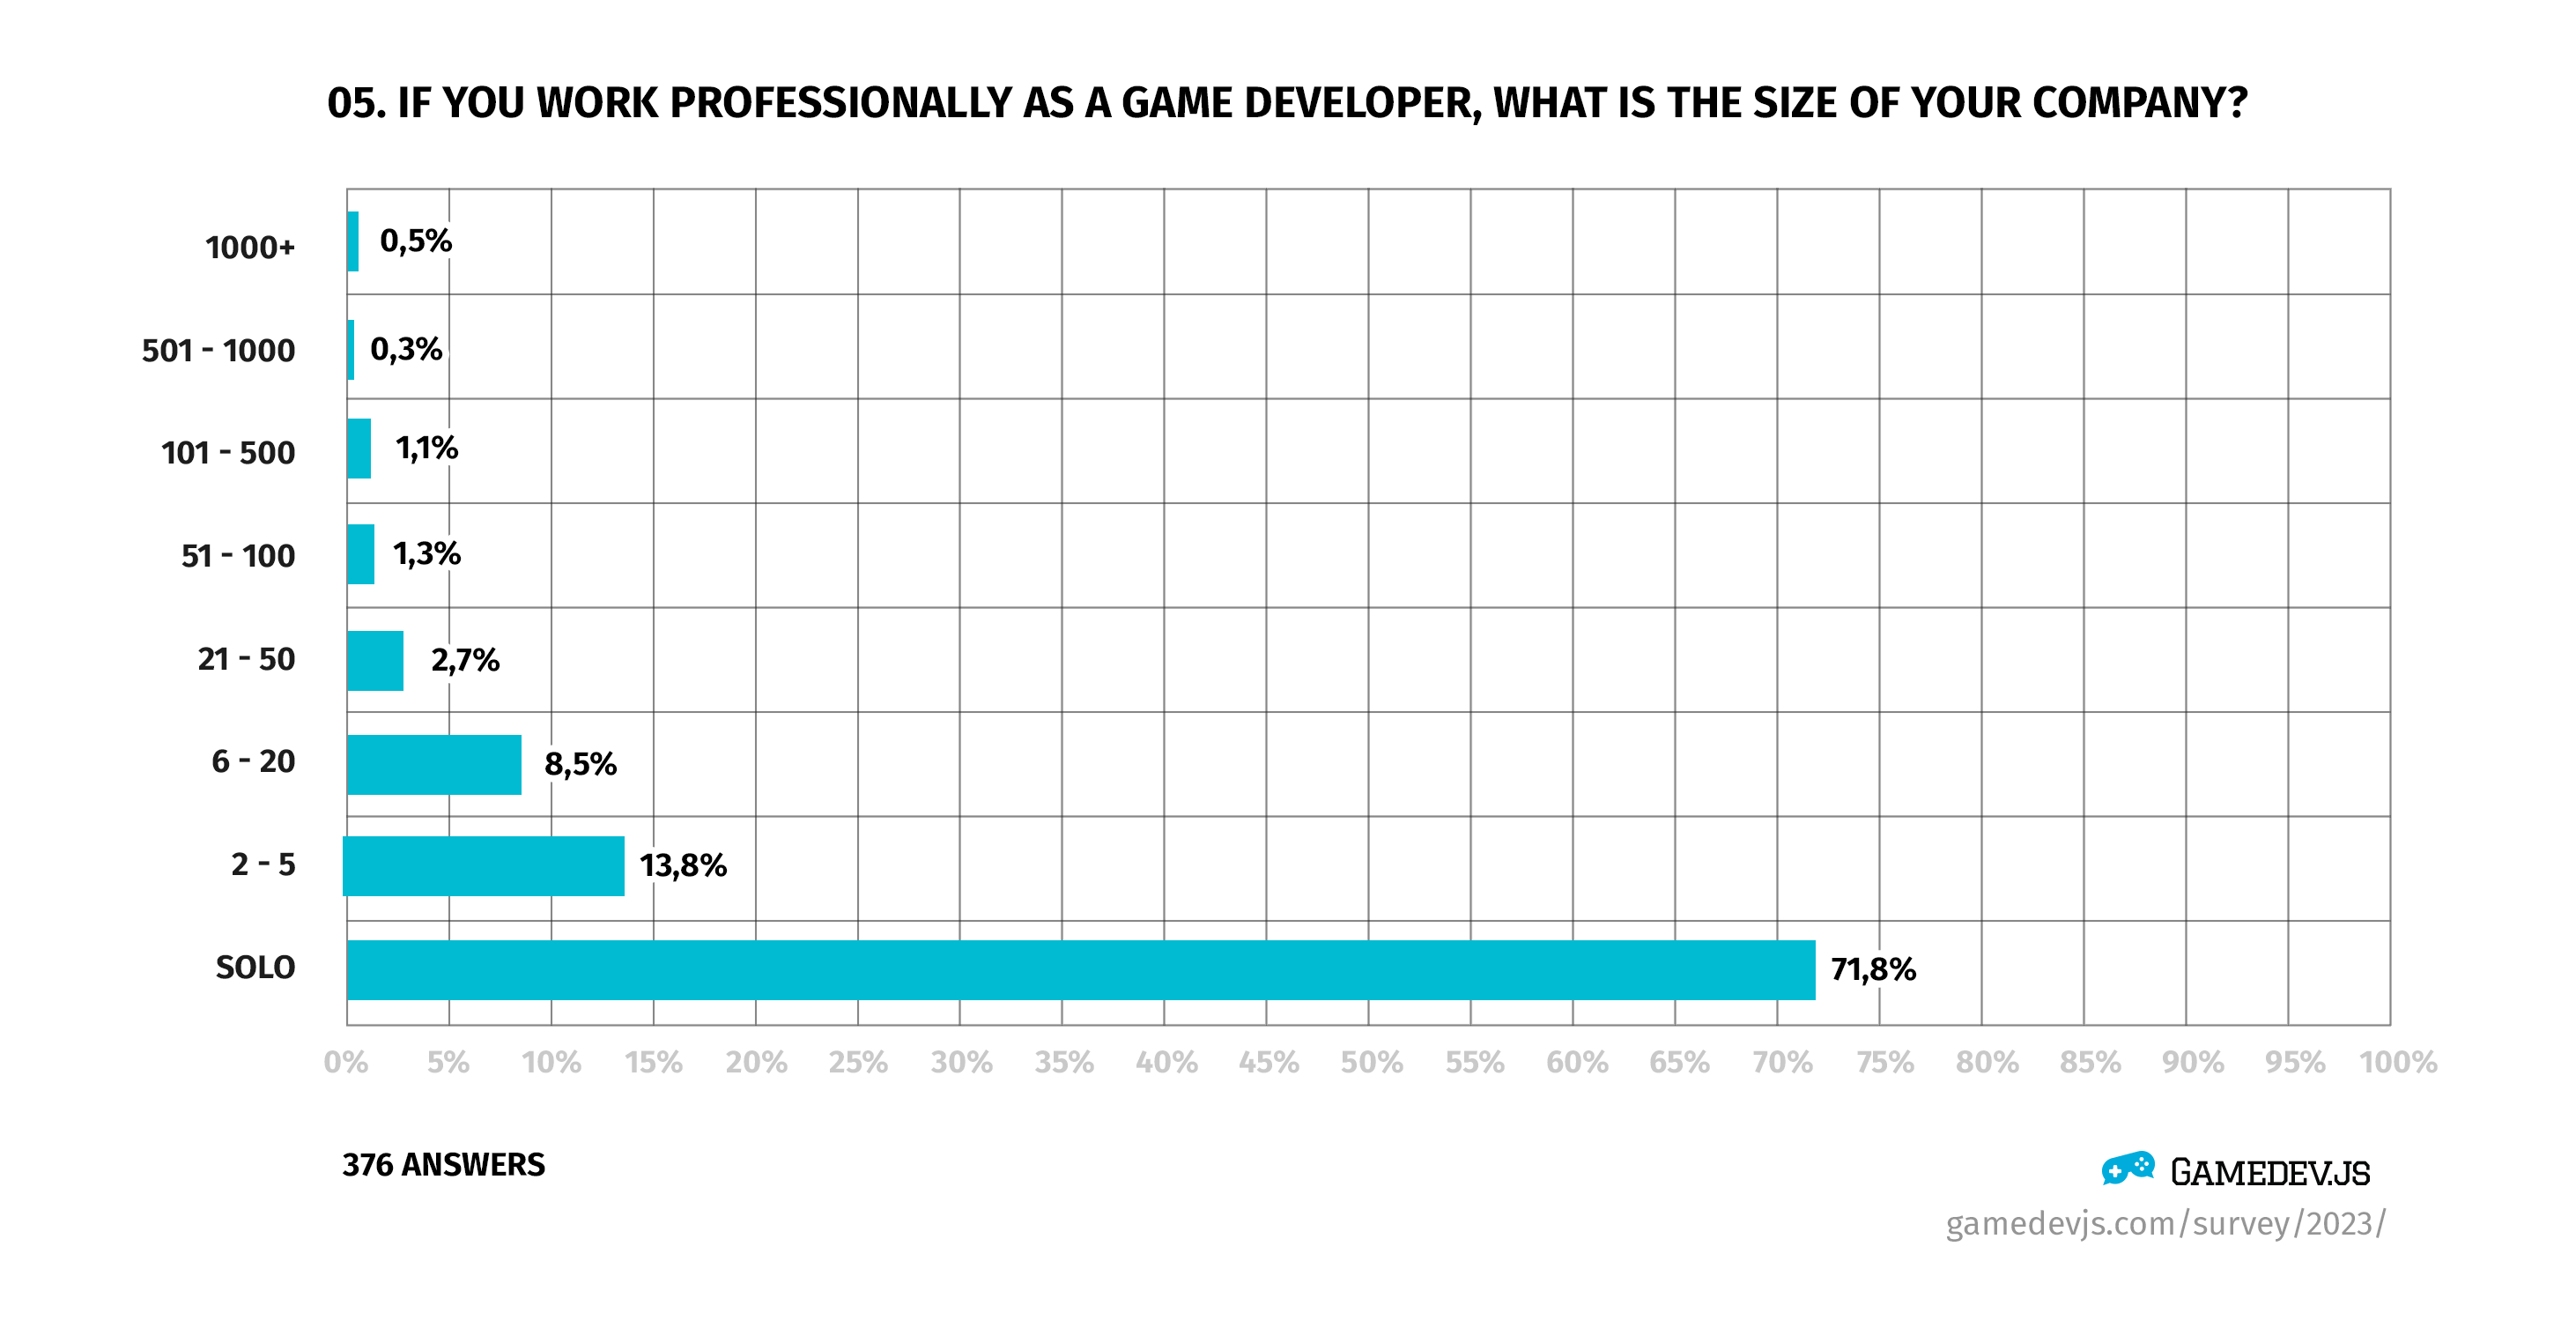 Gamedev.js Survey 2023 - Question #05: If you work professionally as a game developer, what is the size of your company?